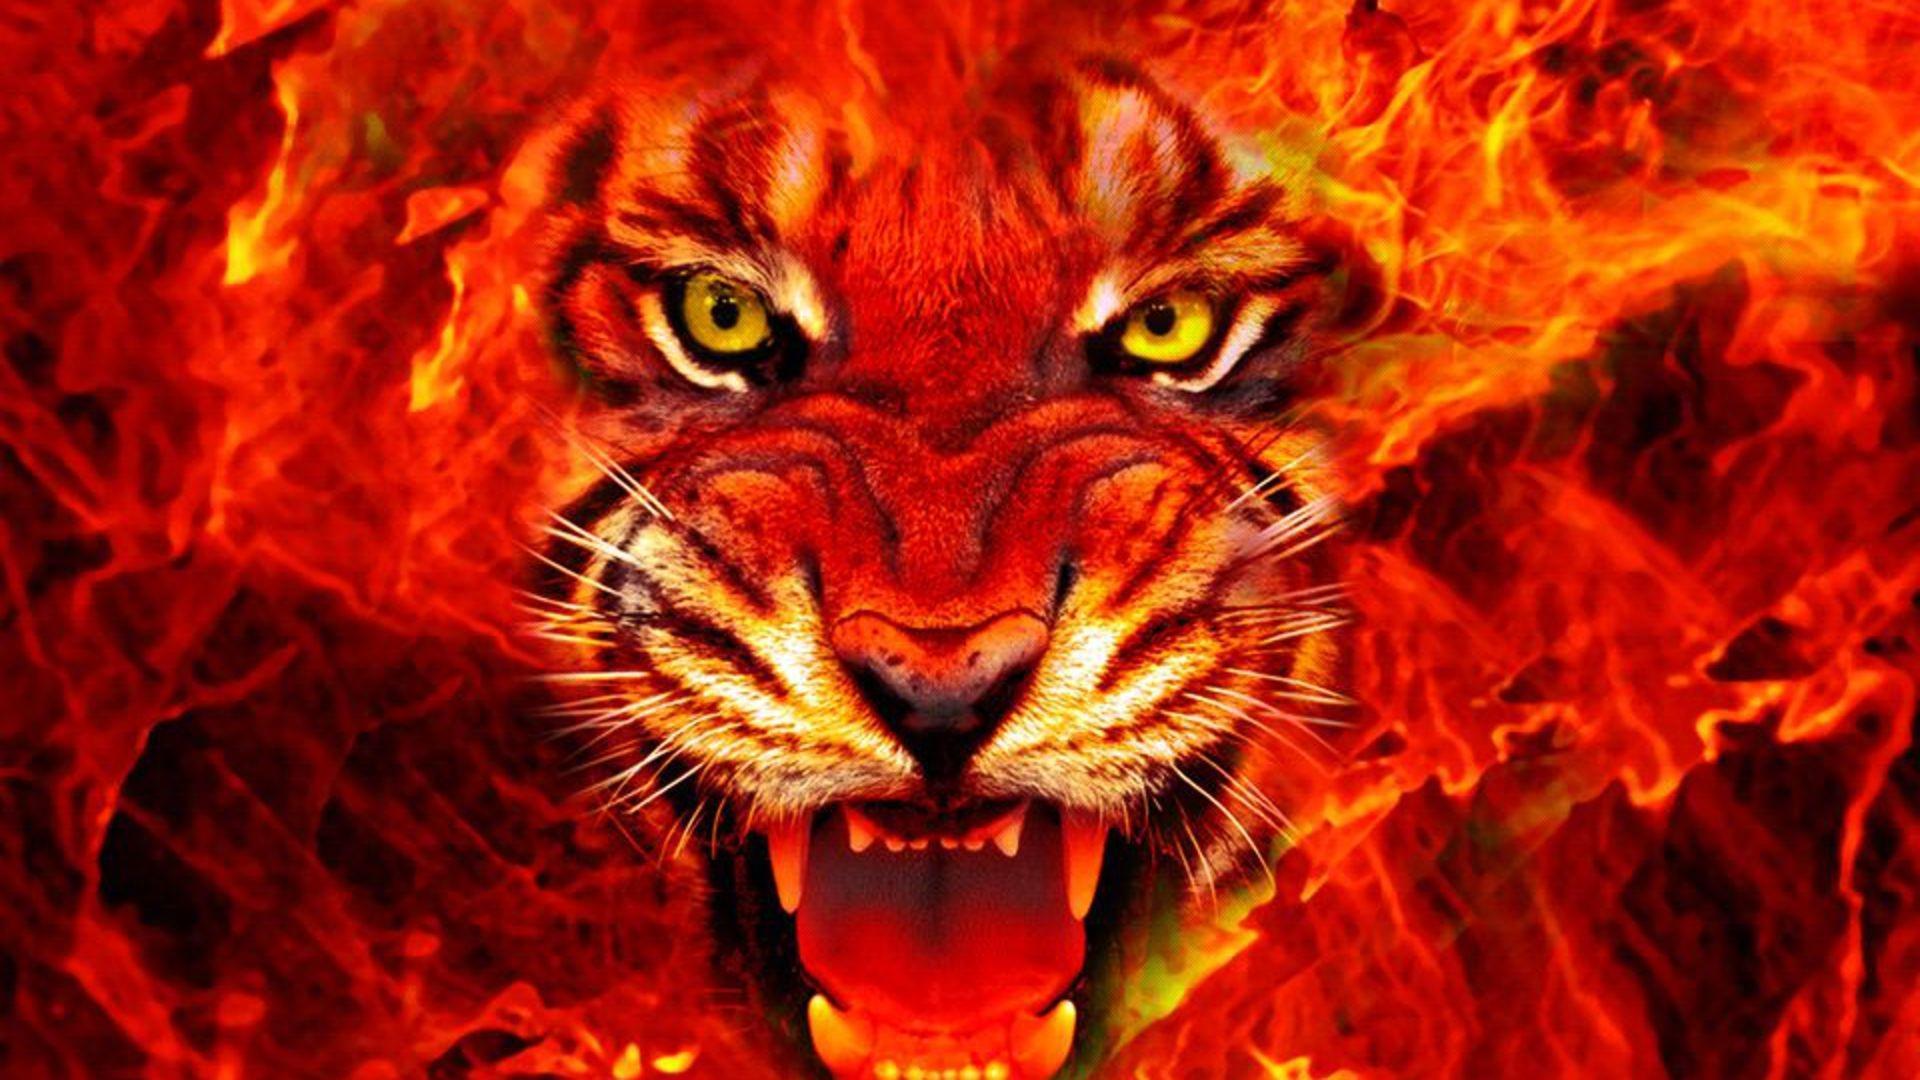 Angry Fire Lion Wallpaper : Lion On Fire Wallpapers | exactwall